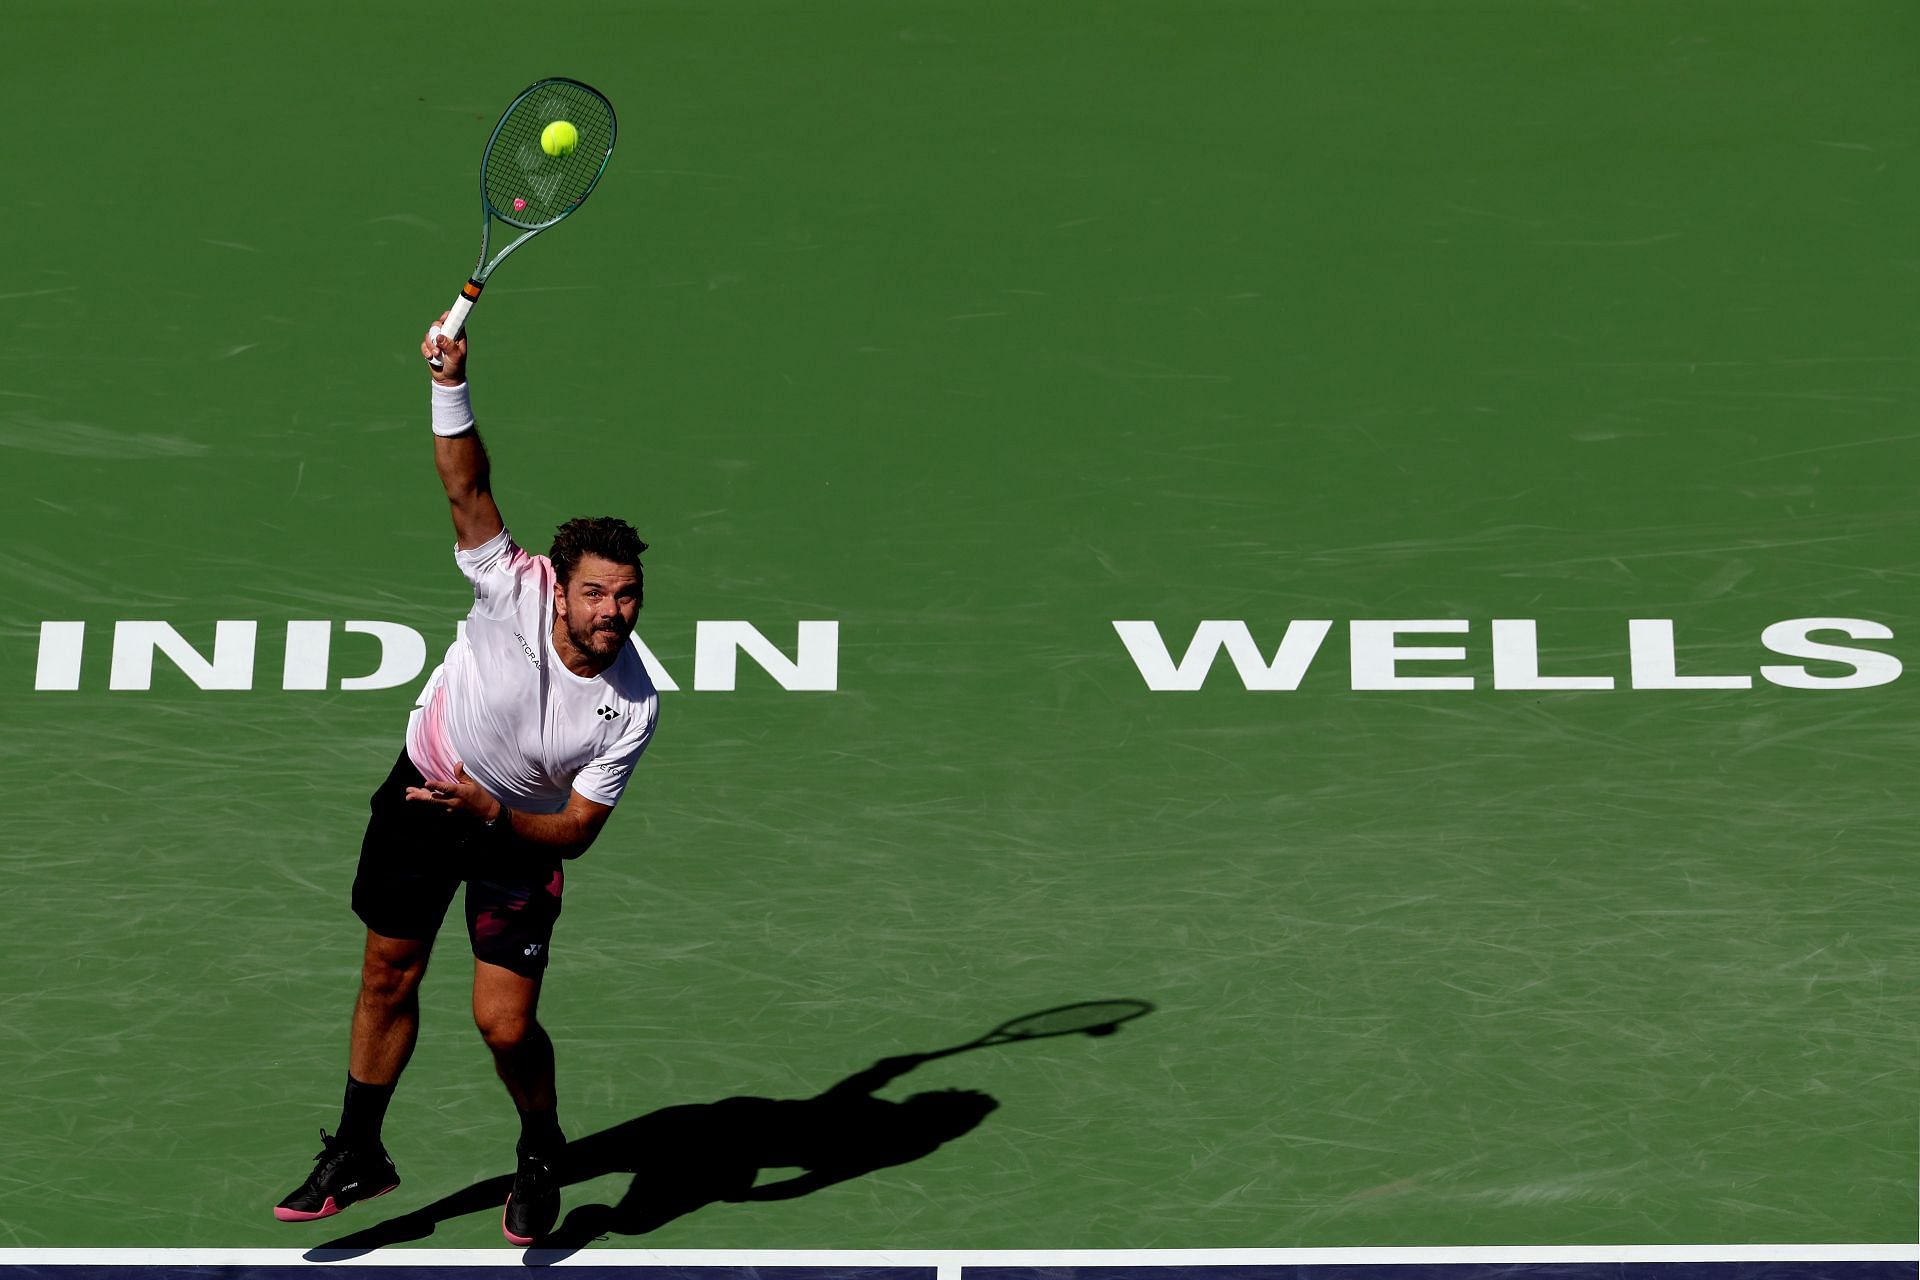 Stan Wawrinka lost in the first round at Indian Wells to Tomas Machac